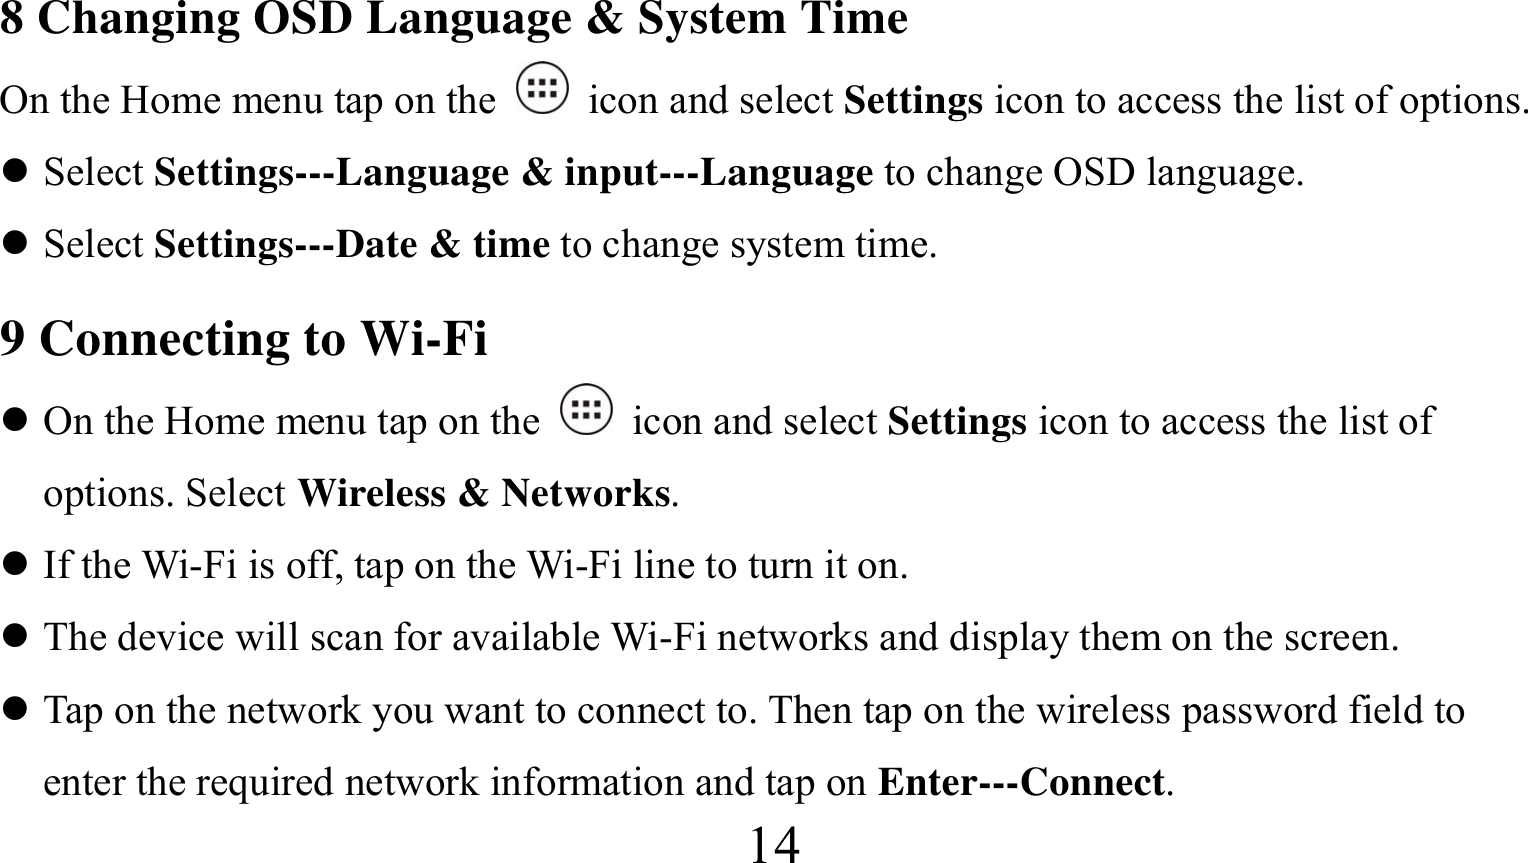  148 Changing OSD Language &amp; System Time On the Home menu tap on the   icon and select Settings icon to access the list of options.    Select Settings---Language &amp; input---Language to change OSD language.  Select Settings---Date &amp; time to change system time. 9 Connecting to Wi-Fi  On the Home menu tap on the   icon and select Settings icon to access the list of options. Select Wireless &amp; Networks.  If the Wi-Fi is off, tap on the Wi-Fi line to turn it on.  The device will scan for available Wi-Fi networks and display them on the screen.  Tap on the network you want to connect to. Then tap on the wireless password field to enter the required network information and tap on Enter---Connect. 